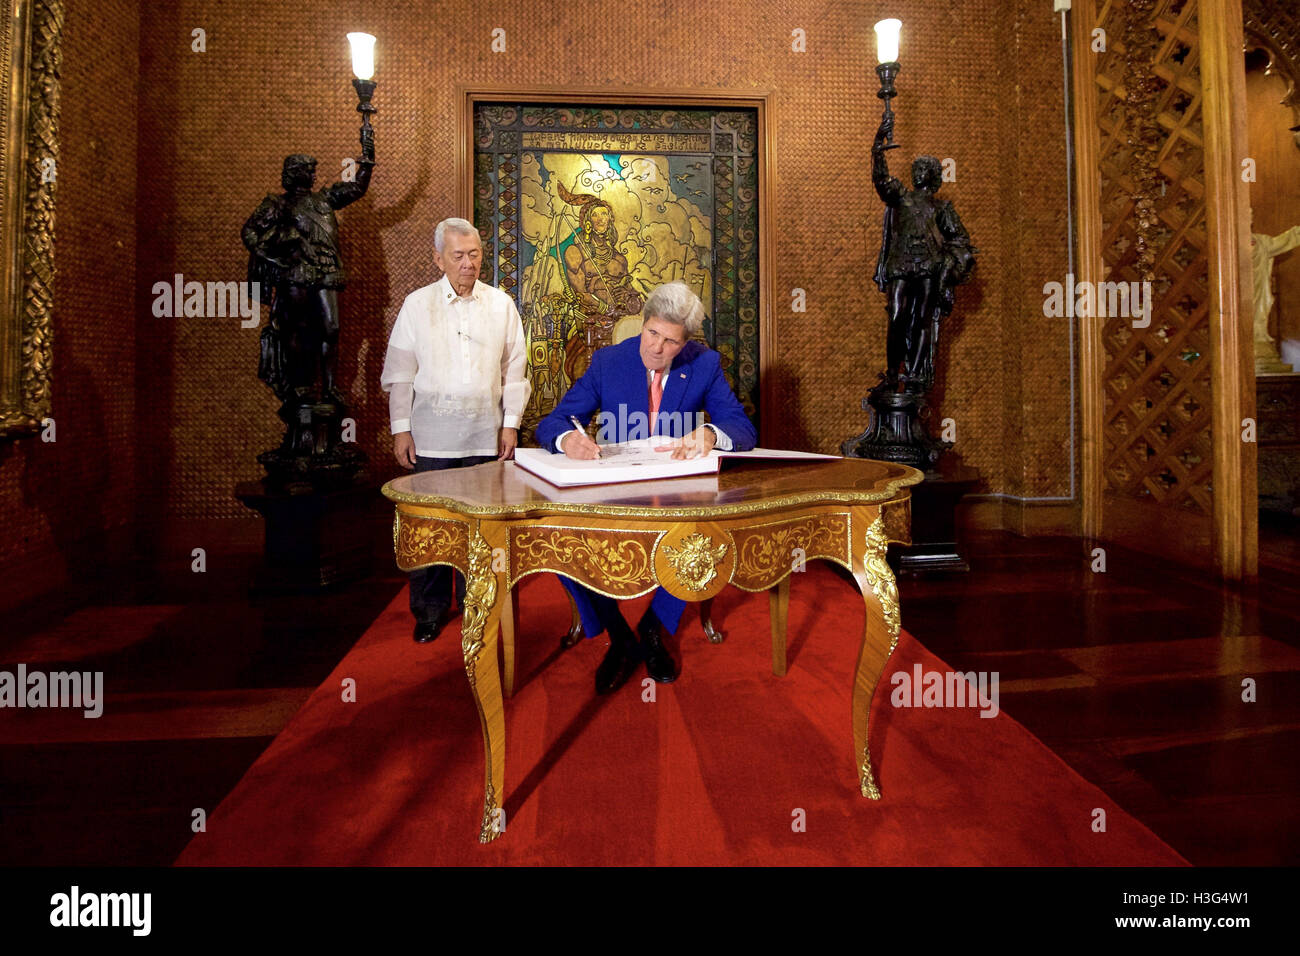 Philippines Foreign Secretary Perfecto Yasay watches as U.S. Secretary of State John Kerry signs the guestbook in the Malacañang Palace in Manila, Philippines, on July 27, 2016, before the Secretary held a working lunch with Philippines President Rodrigo Duterte. Stock Photo